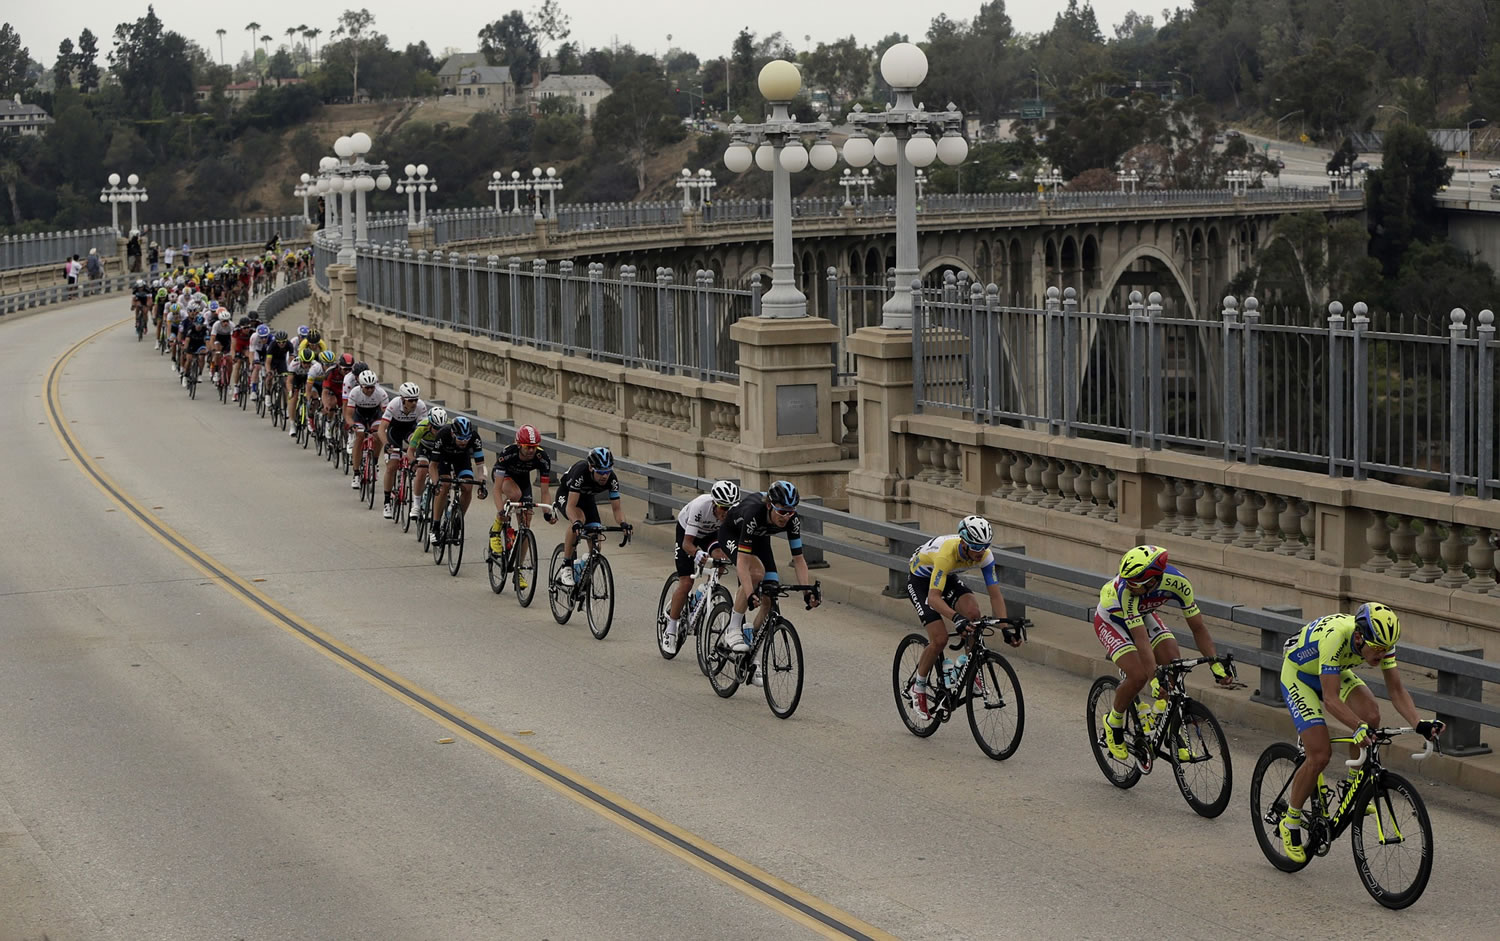 The peloton crosses the Colorado Street Bridge on the final stage of the Amgen Tour of California cycling race from Los Angeles to Pasadena on Sunday in Pasadena, Calif.